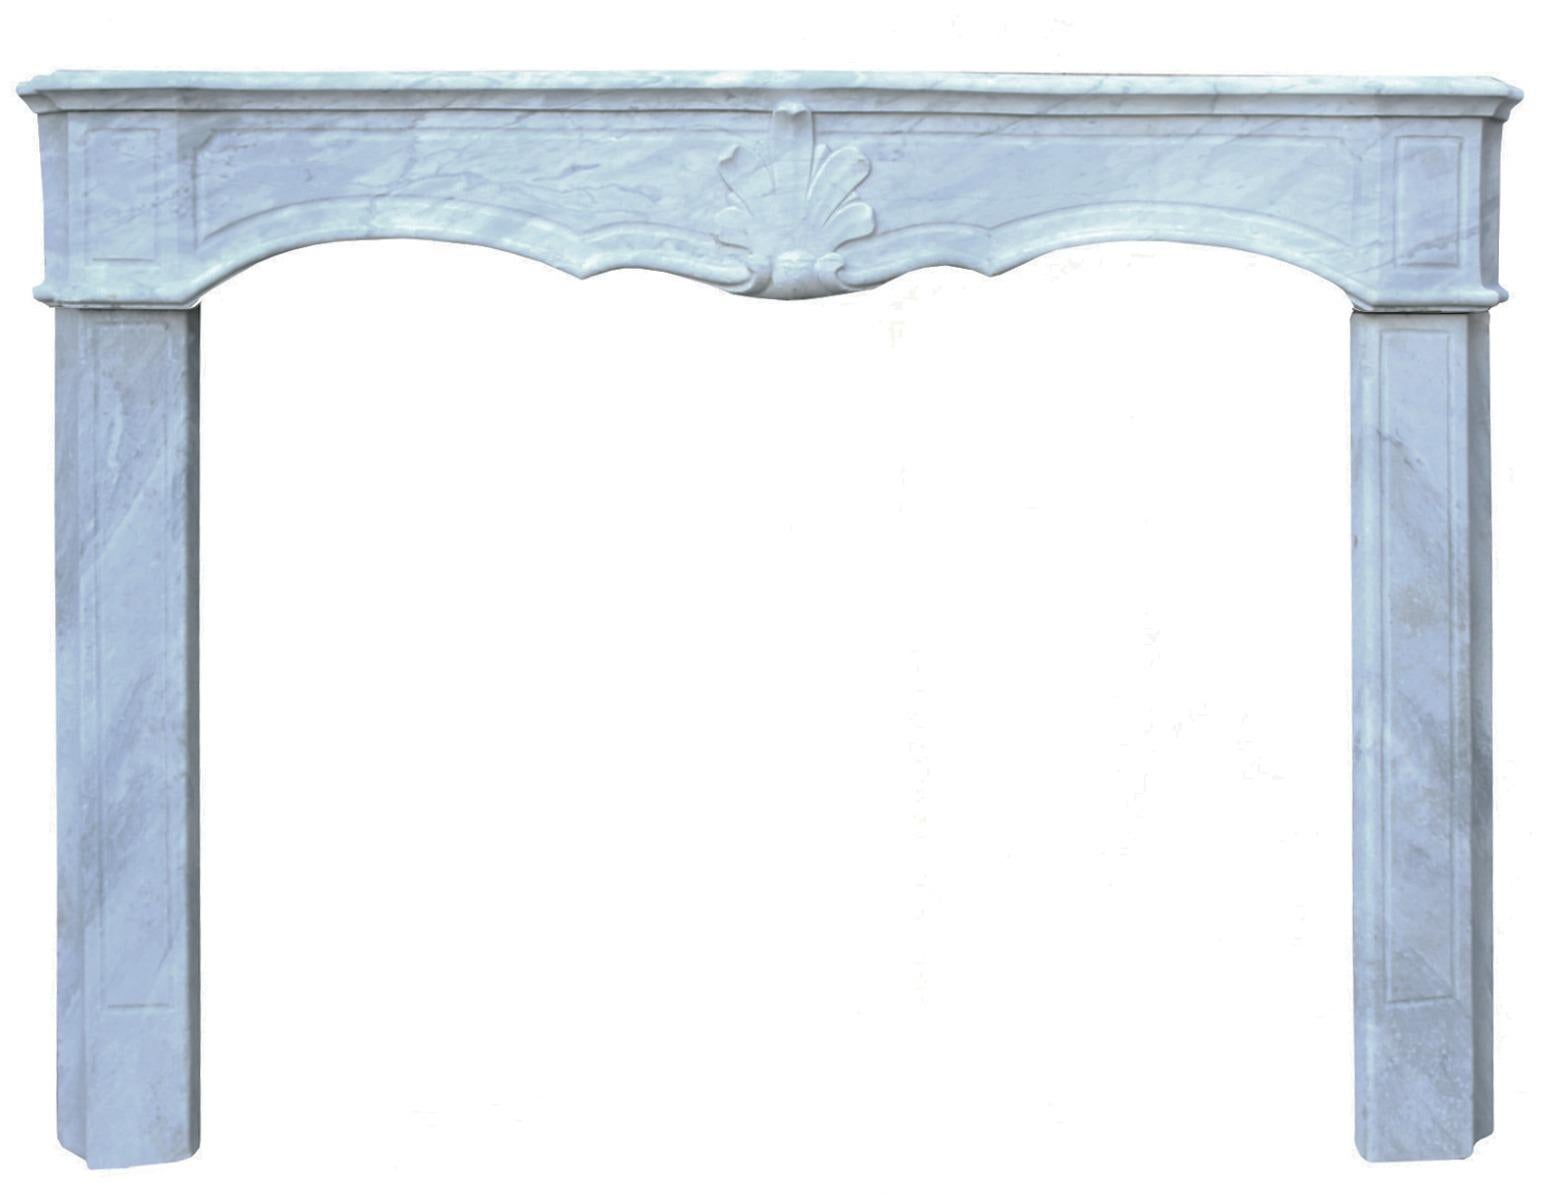 An attractive marble surround with shaped top and frieze with central shell motif.

Measures: Opening height 91.5 cm

Opening width 117 cm

Width Between Outside of Legs 151 cm.